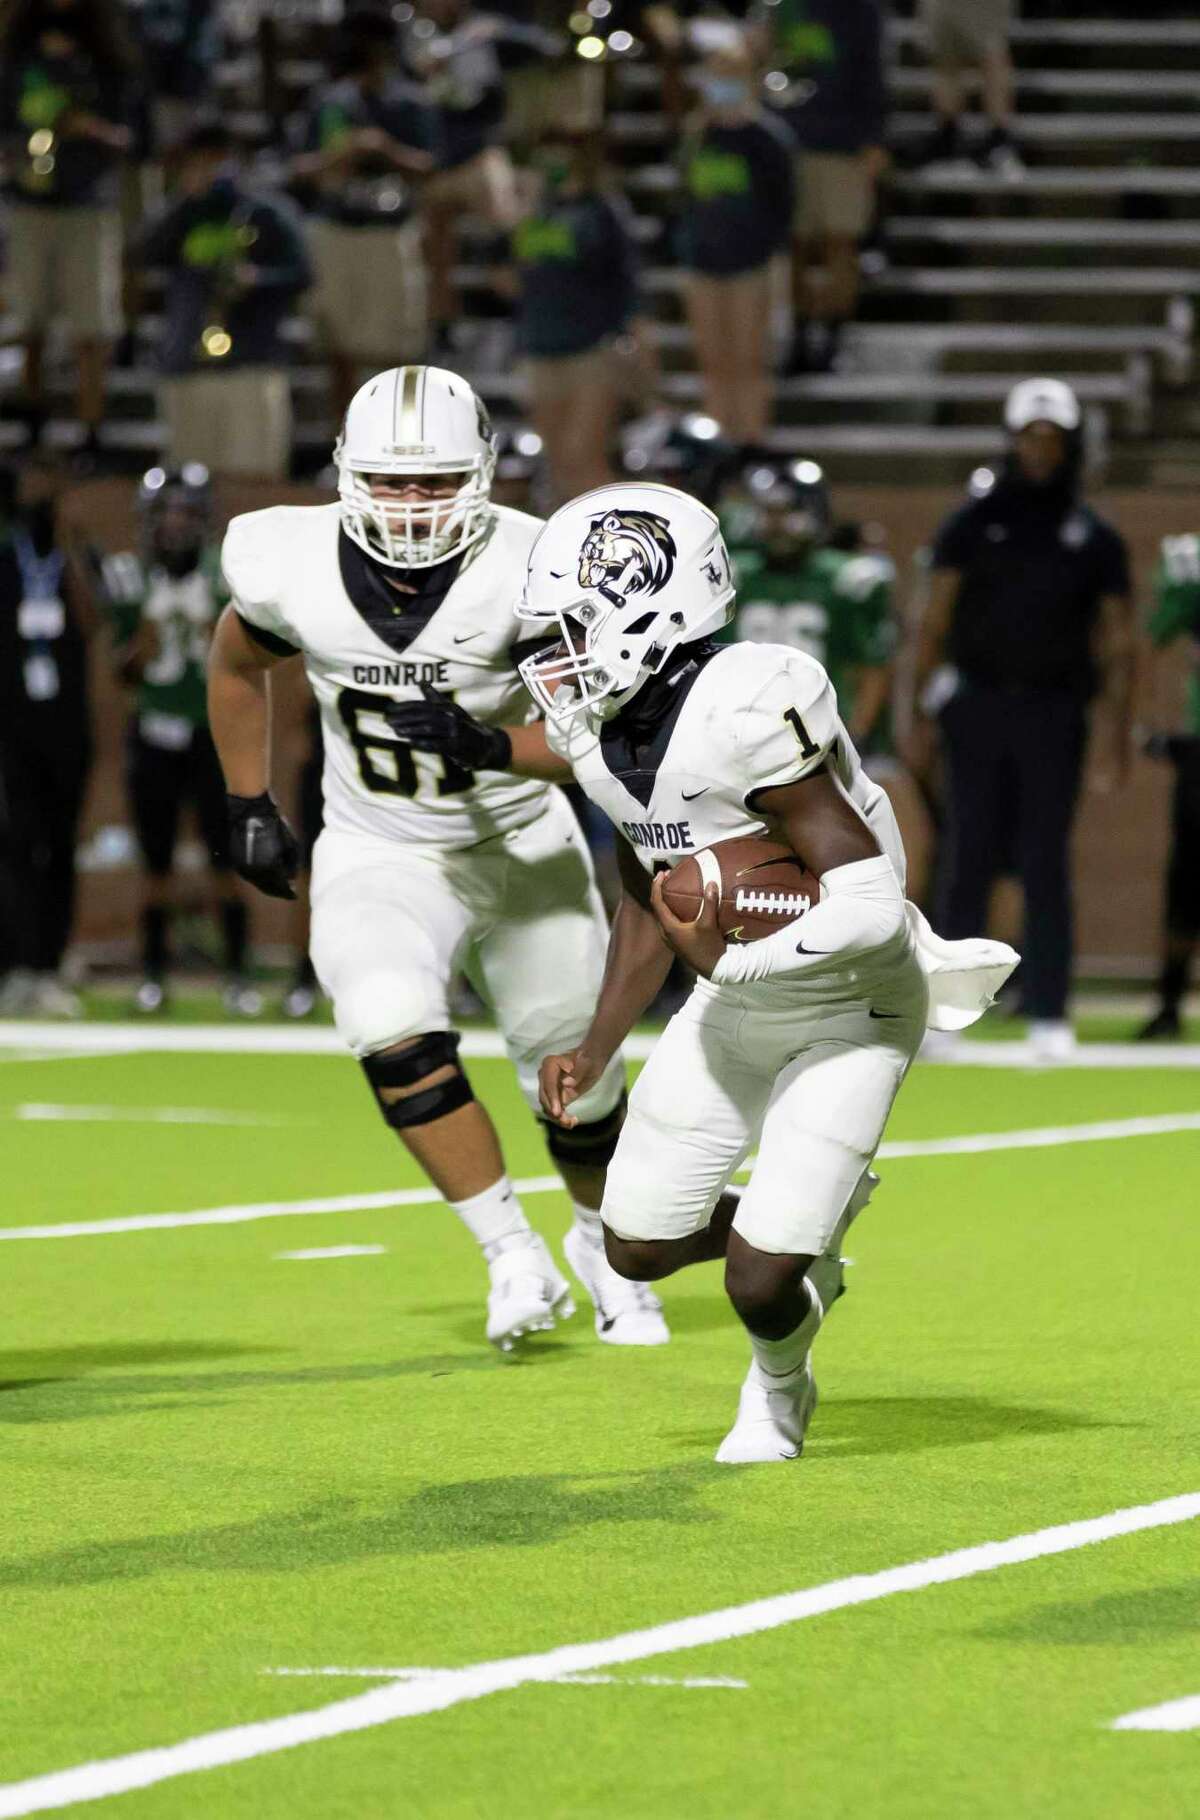 Conroe quarterback Jalen Williams (1) looks for an opening to pass the ball during the second quarter of a non-district football game against Mayde Creek at Rhodes Stadium in Katy, Friday, Sept. 25, 2020.